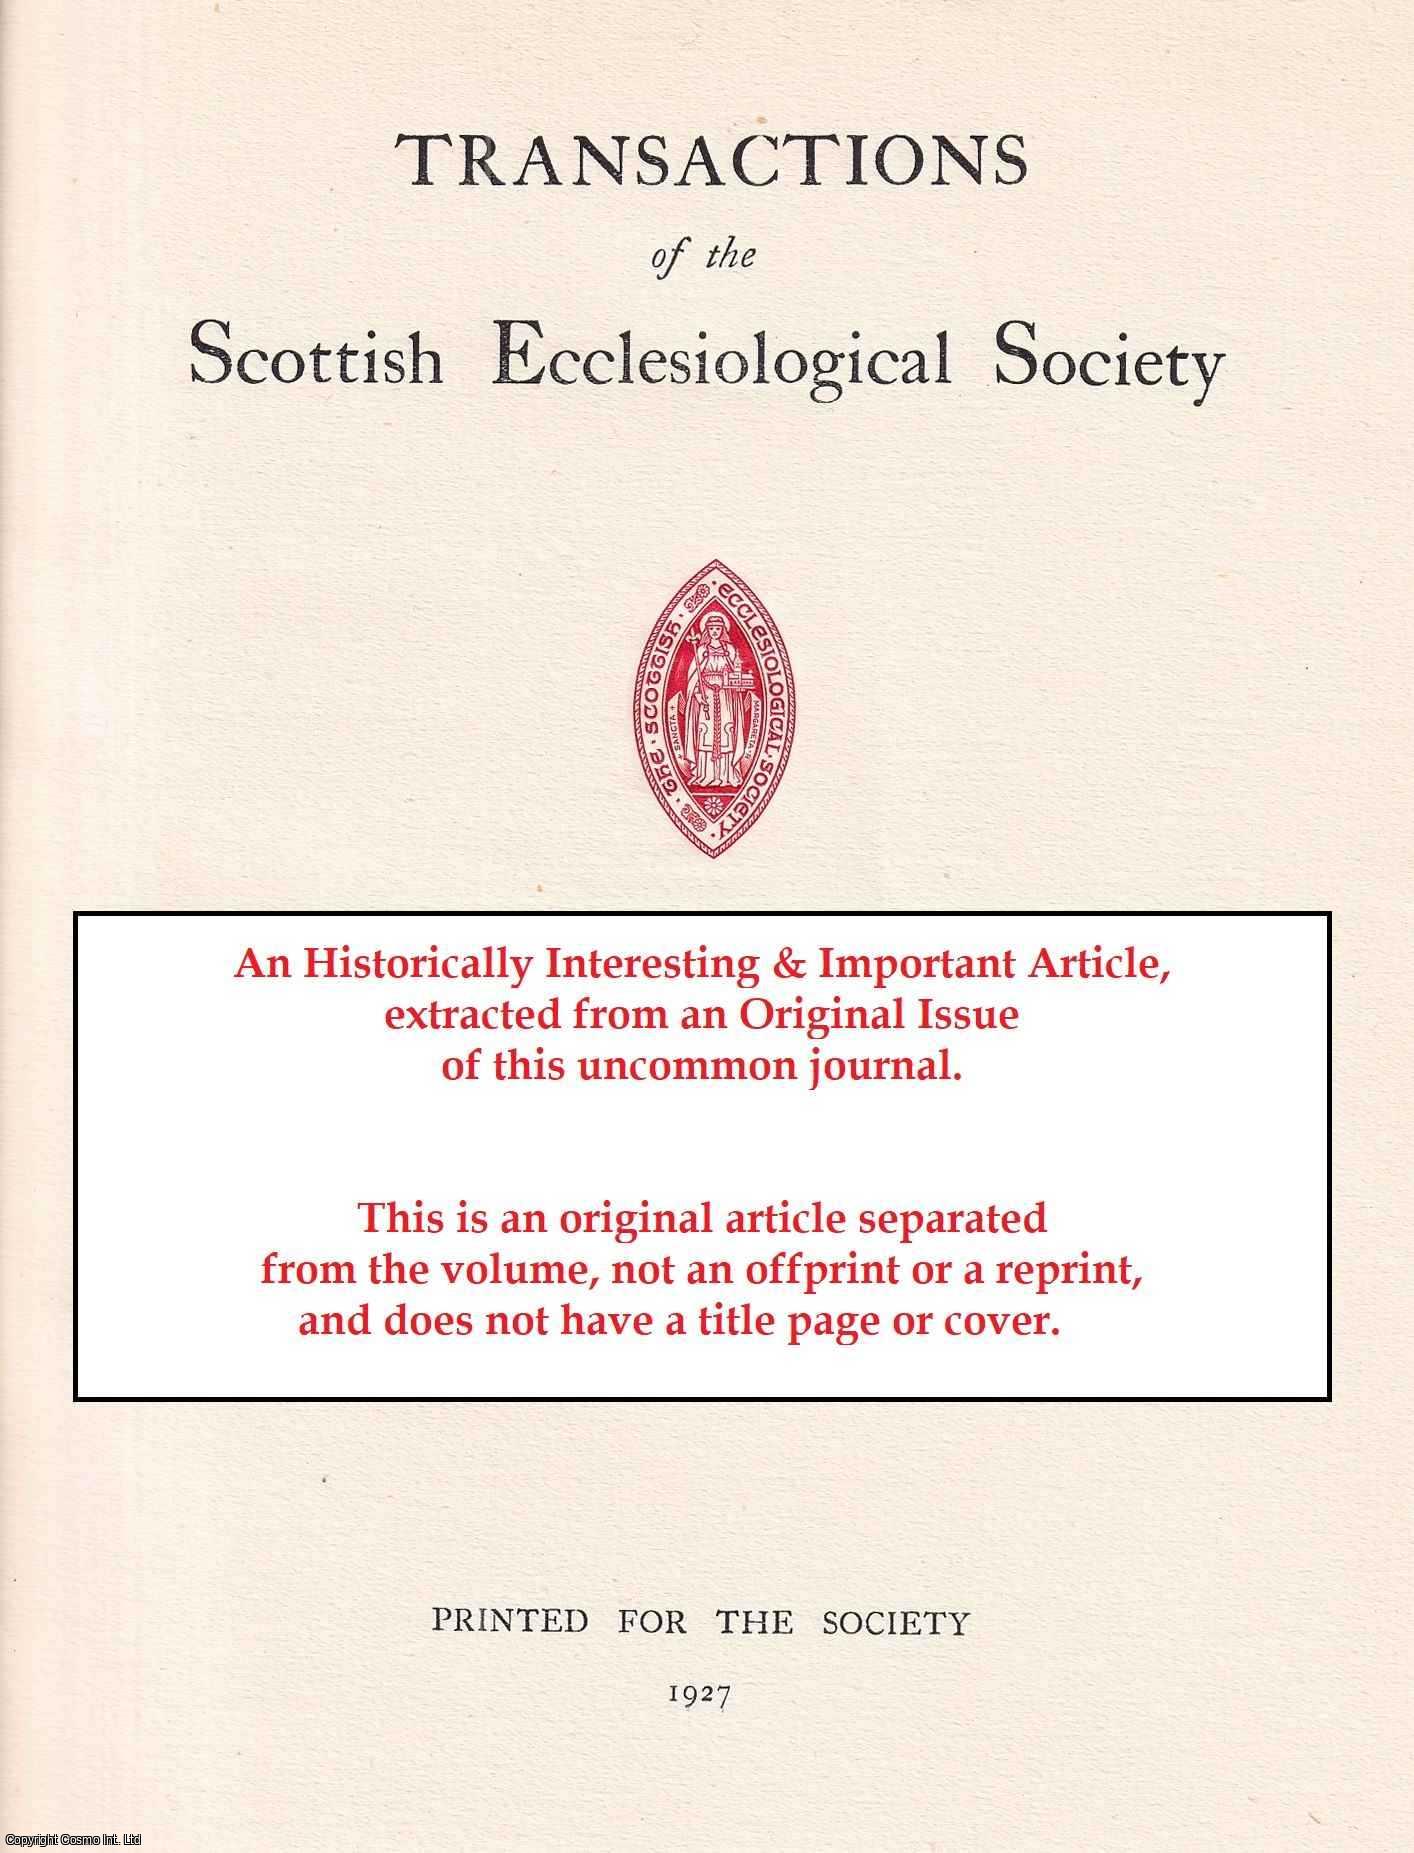 F.C. Eeles - Surrey Churches. An original article from the Transactions of the Scottish Ecclesiological Society, 1920.